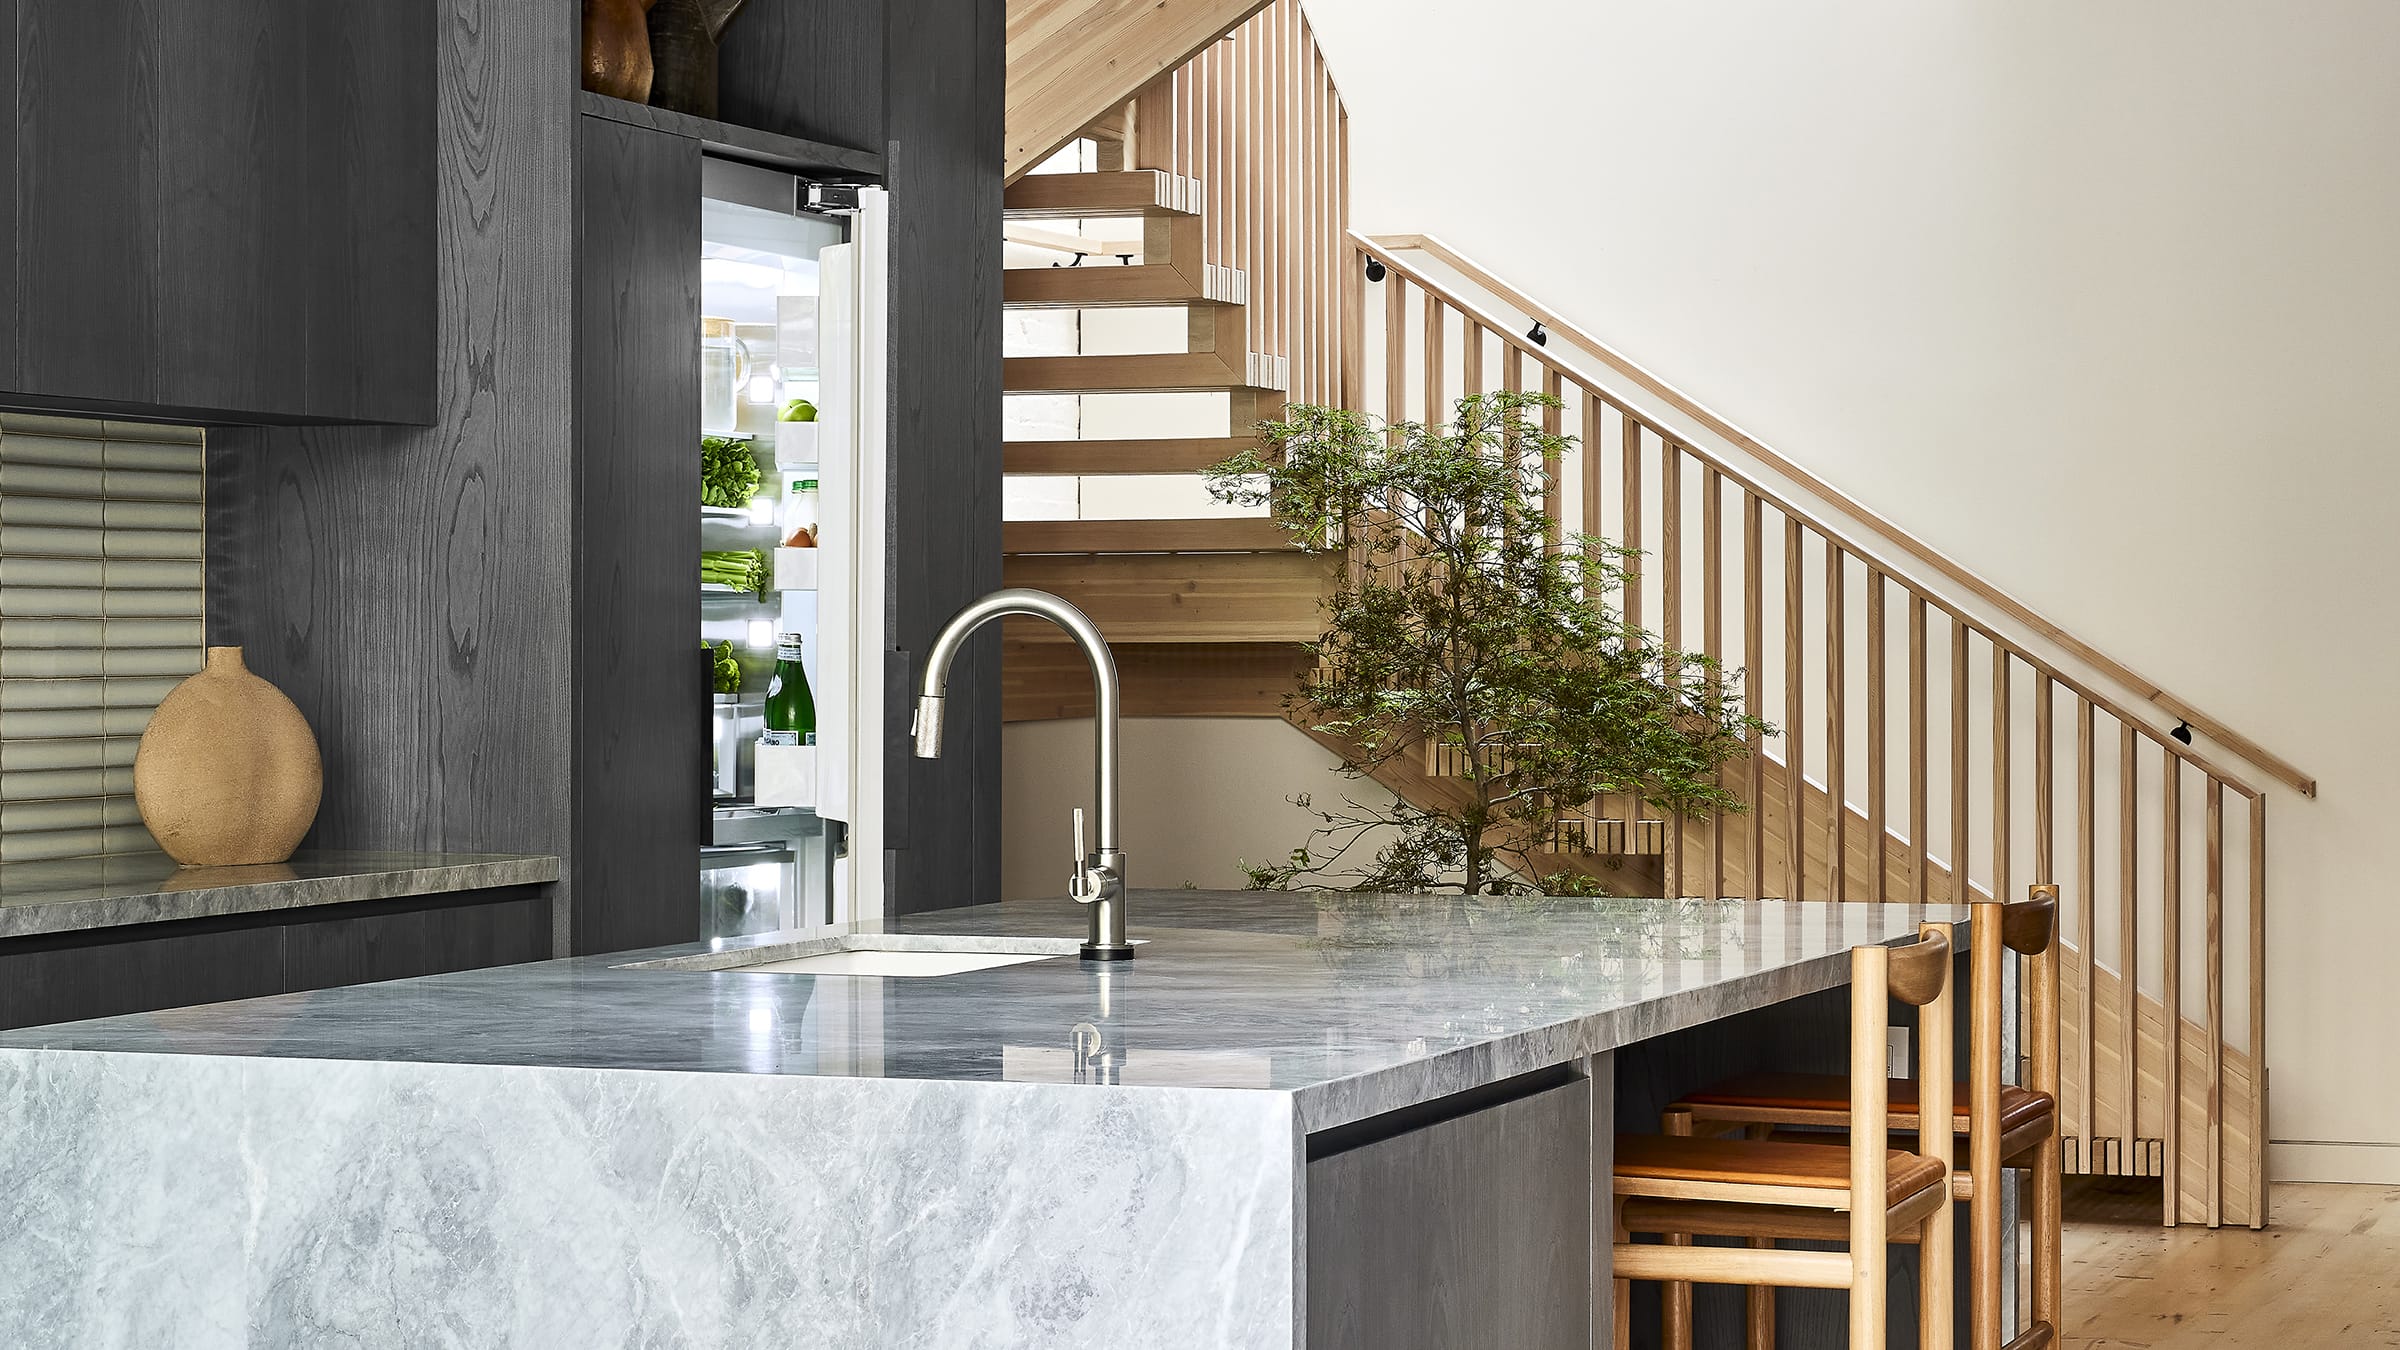 Clinton Hill renovation engaged Fisher and Paykel for kitchen design solutions